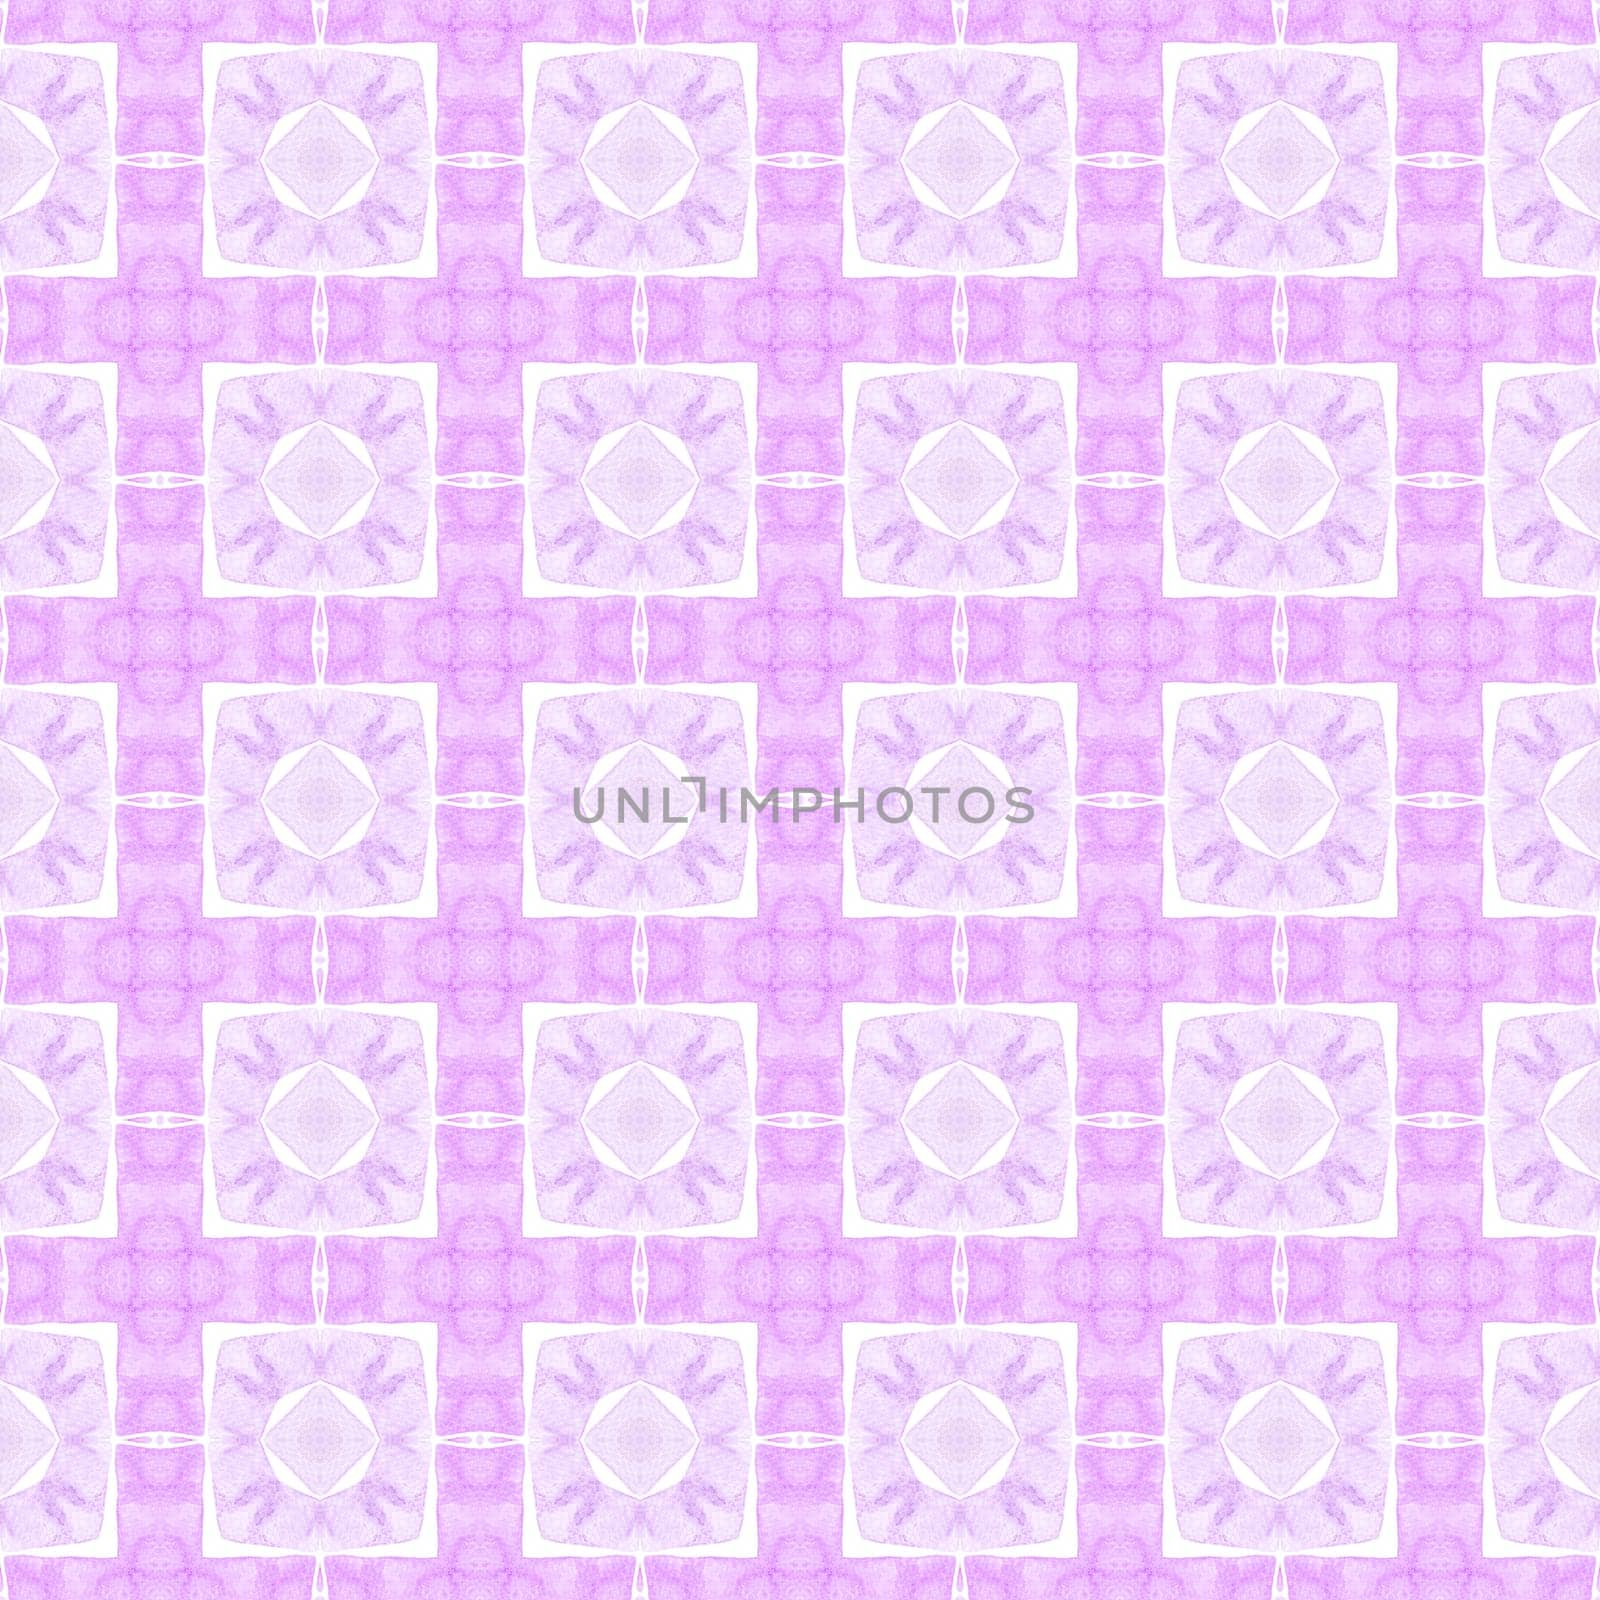 Textile ready alluring print, swimwear fabric, wallpaper, wrapping. Purple exotic boho chic summer design. Ethnic hand painted pattern. Watercolor summer ethnic border pattern.